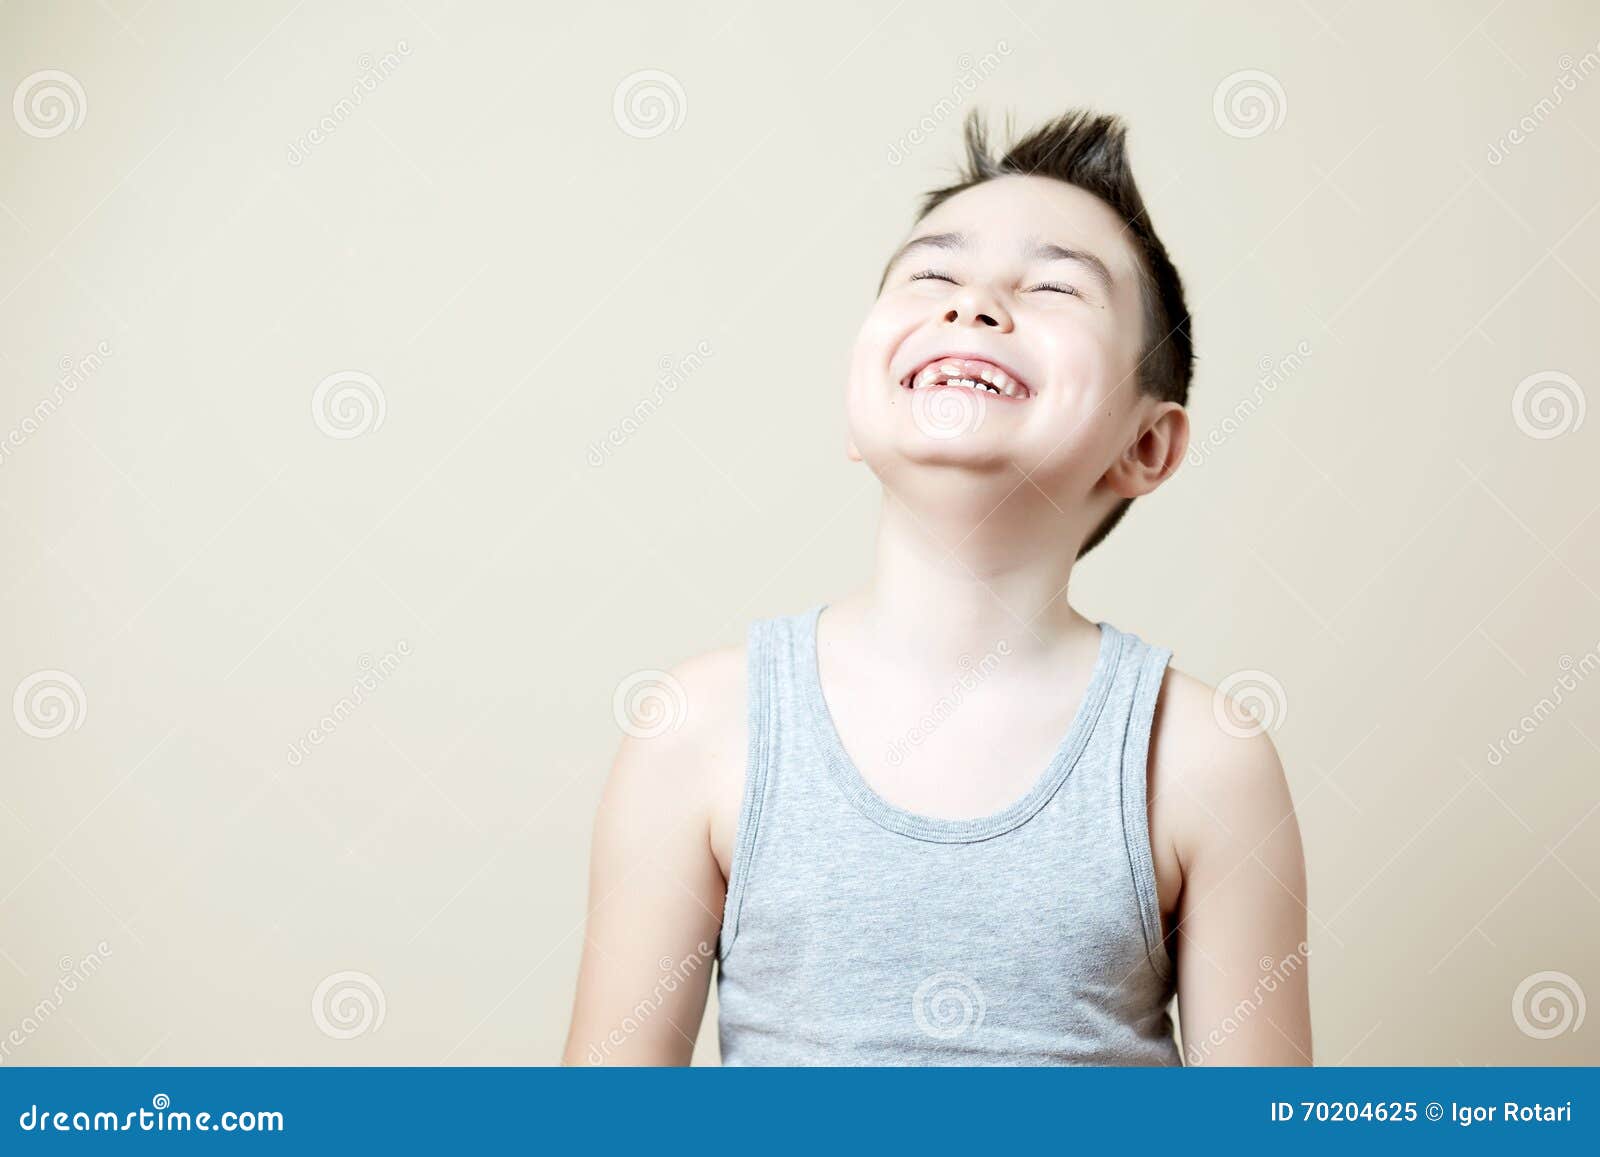 Lol Keys Meaning Laughing Out Loud Laugh Funny Or Hilarious Stock Photo -  Alamy